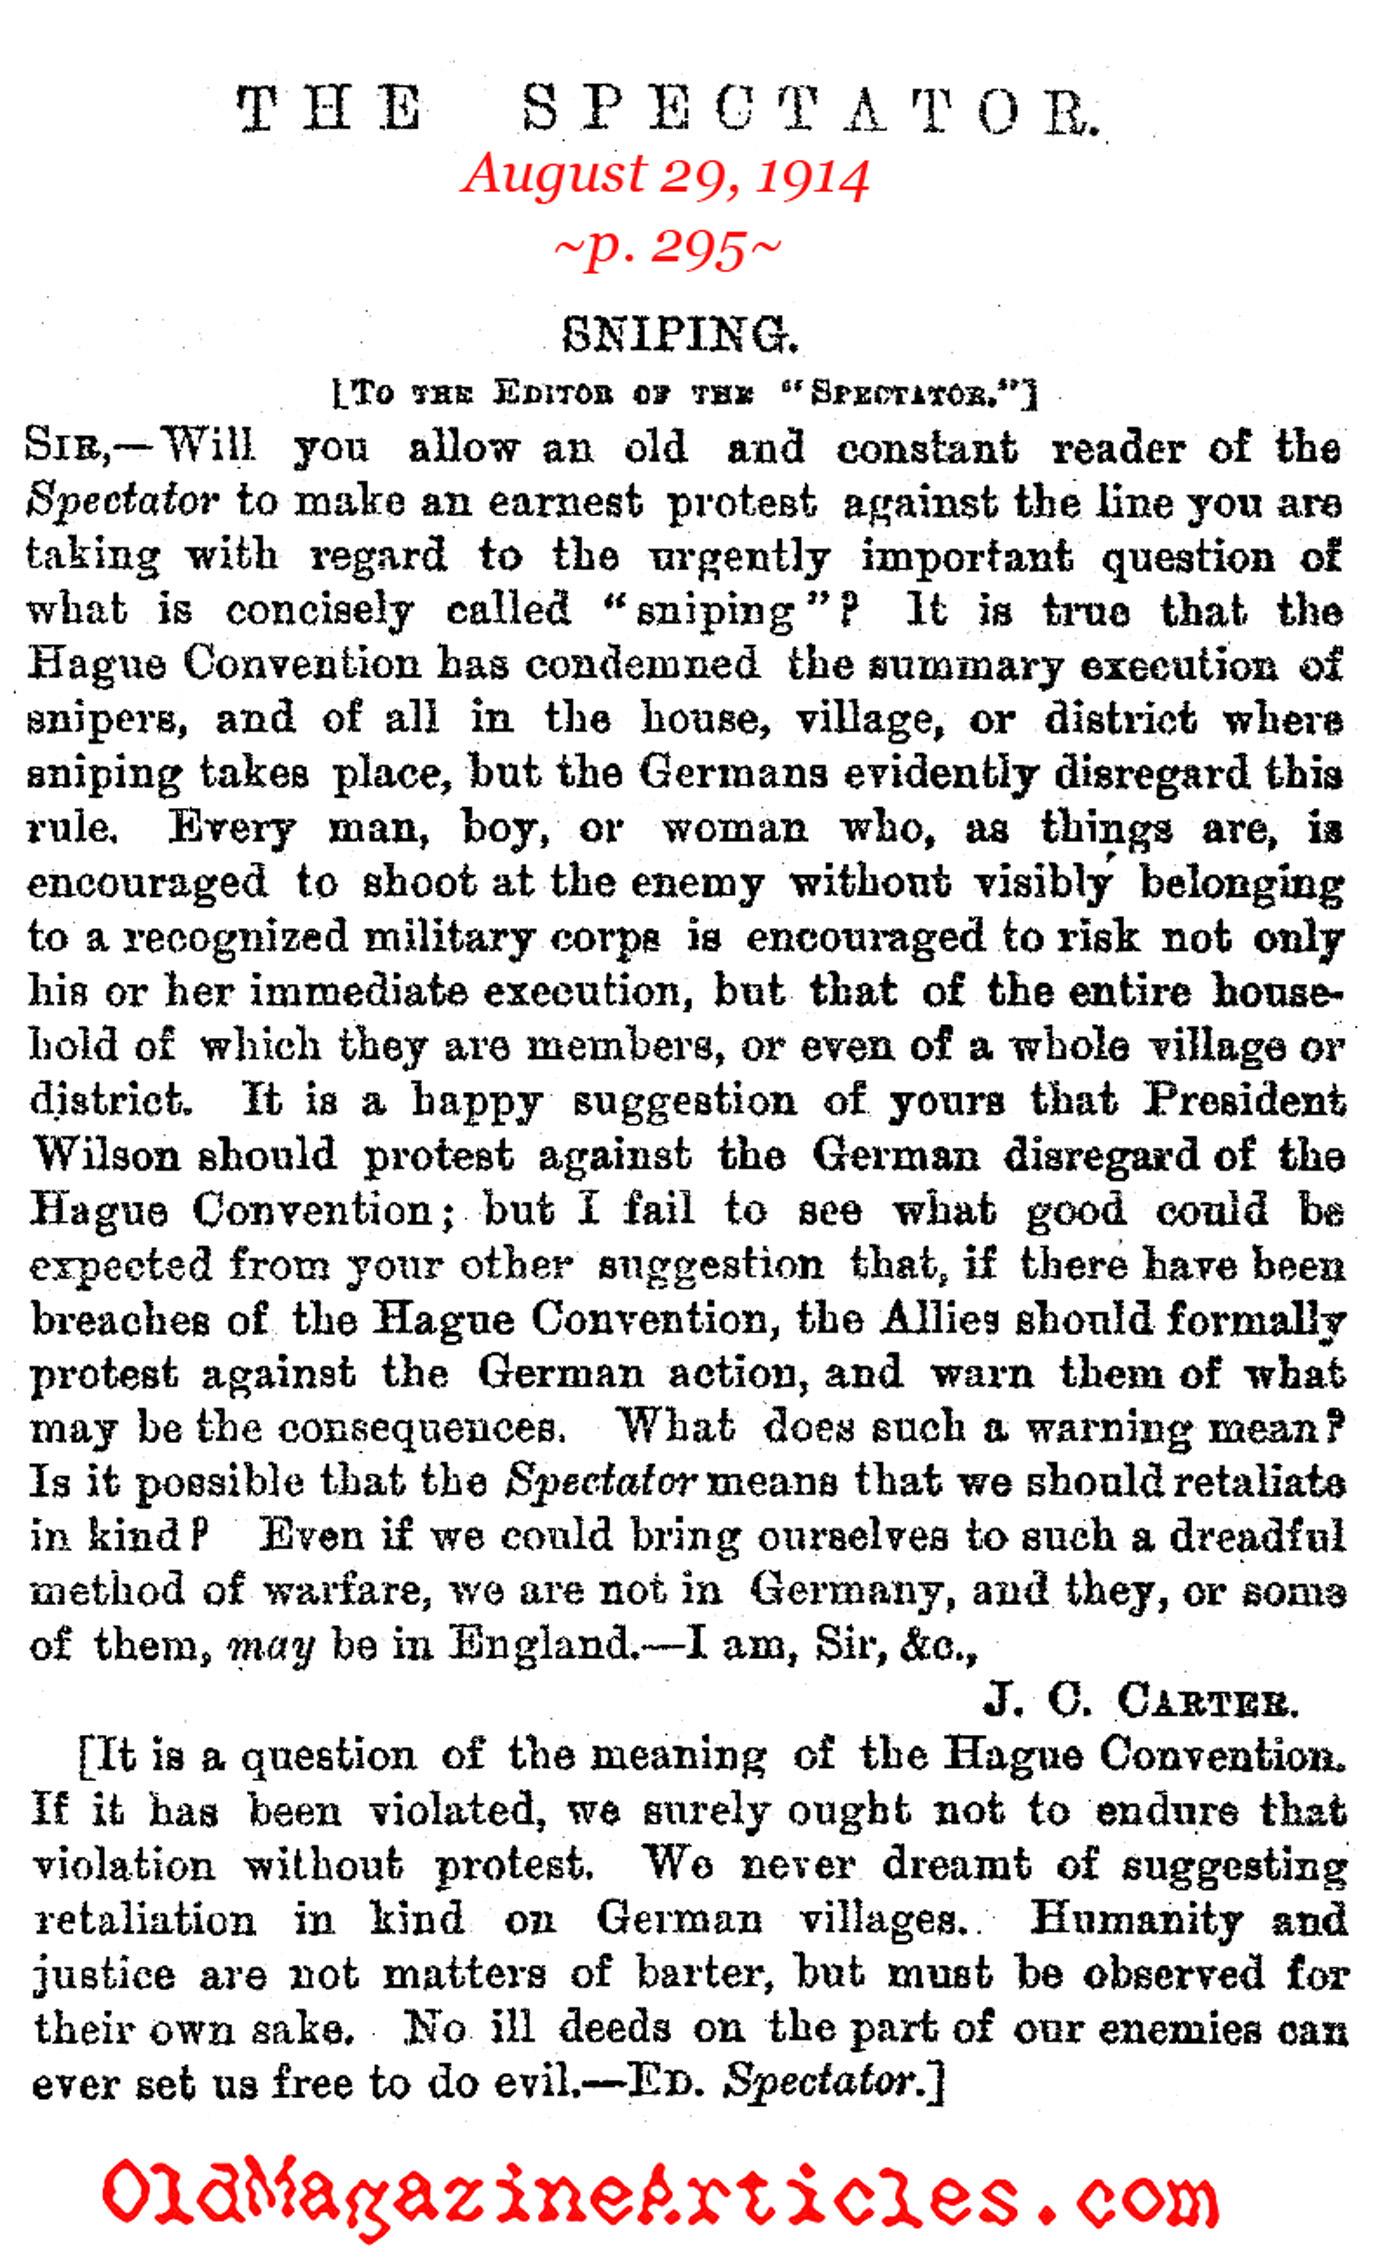 Snipers and the Hague Convention (The Spectator, 1914)